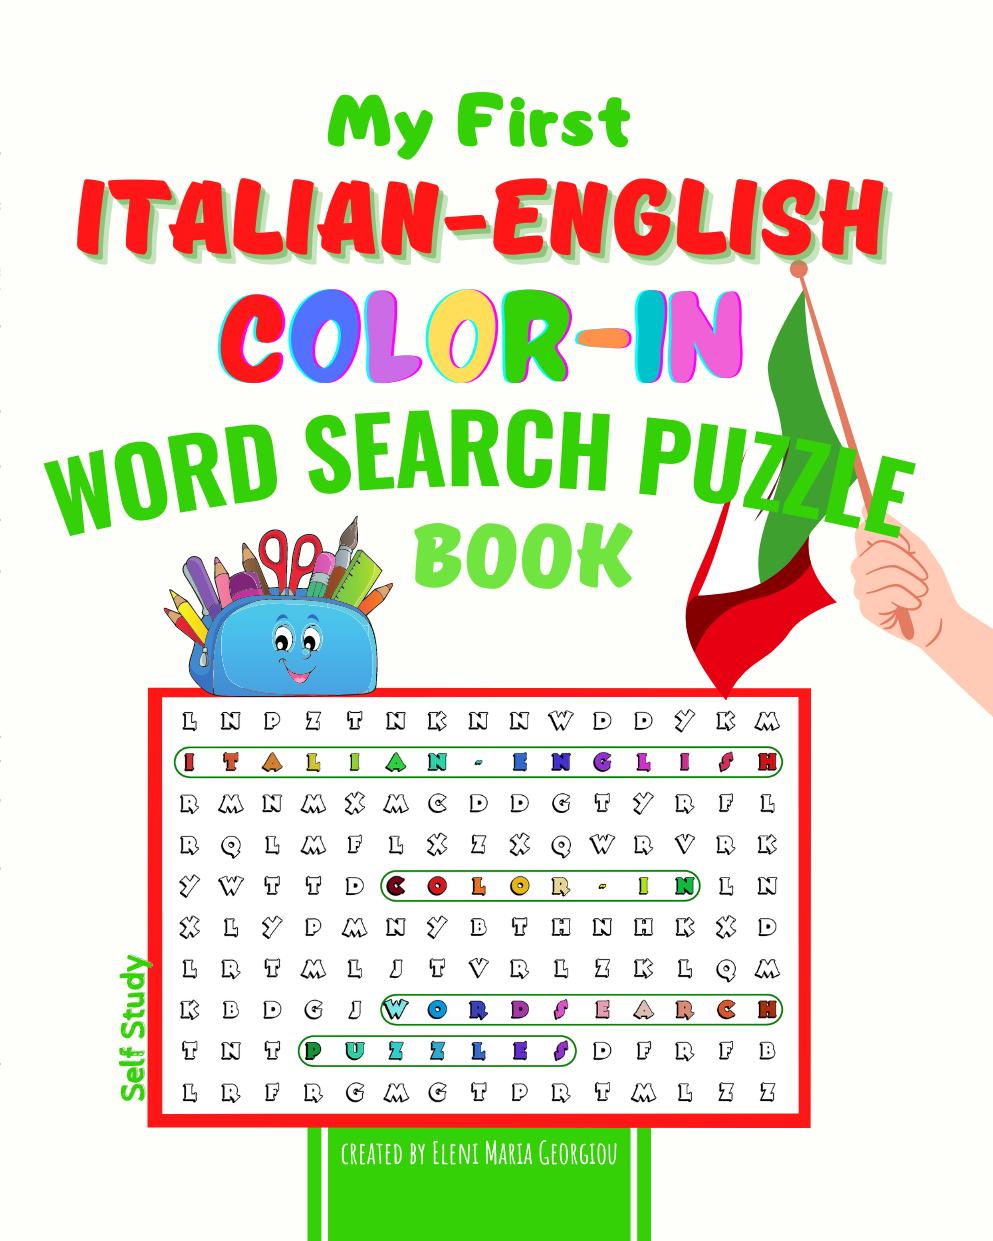 My First Italian-English Color-In Word Search Puzzle Book